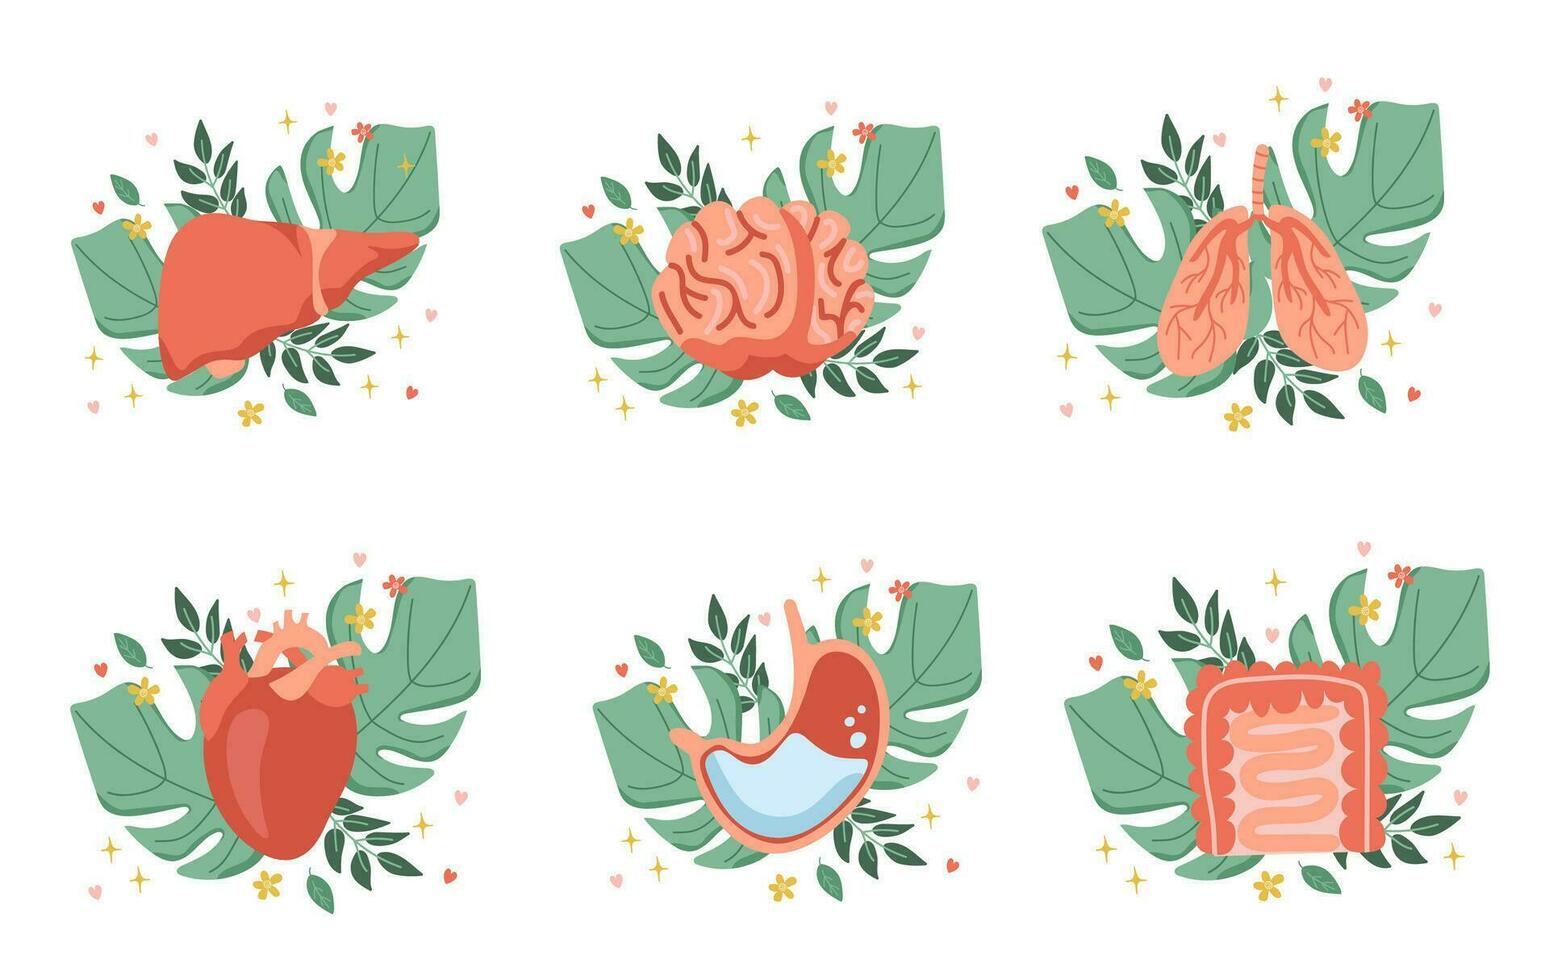 Human organs, kidneys, heart, lungs, liver, brain. Compositions on the background of leaves. Vector illustration